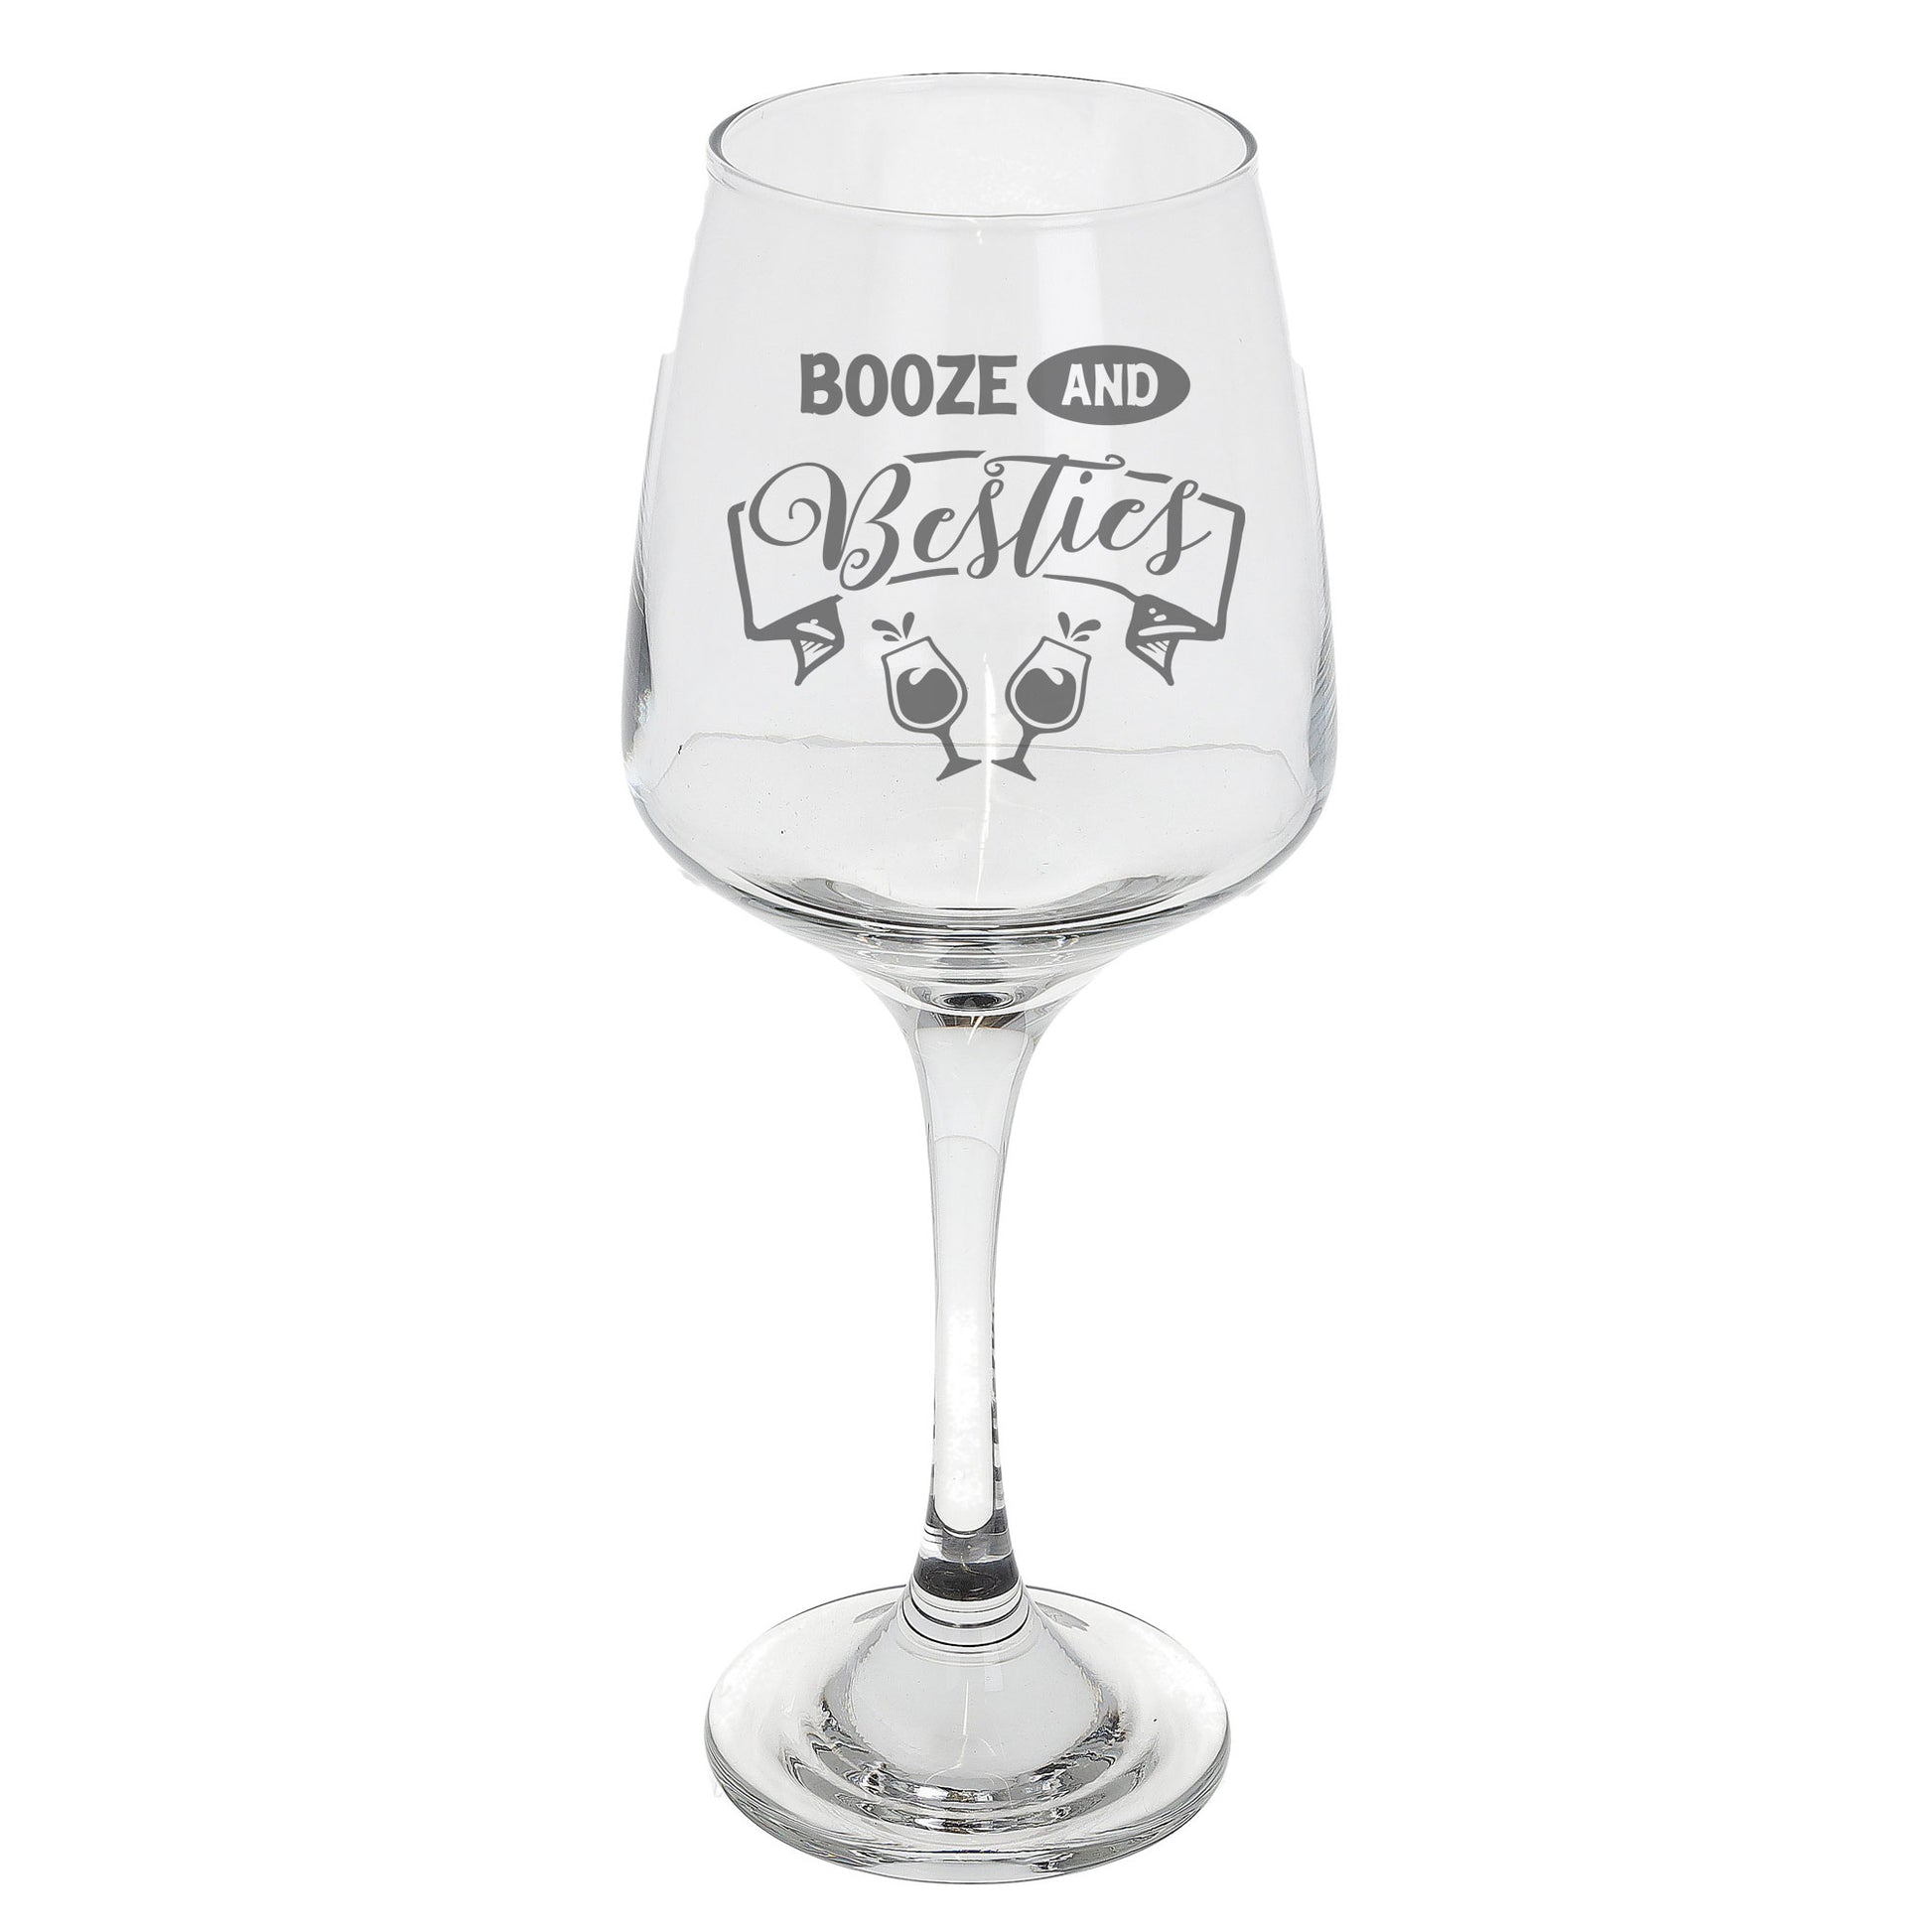 Booze and Besties Engraved Wine Glass and/or Coaster Set  - Always Looking Good - Wine Glass Only  